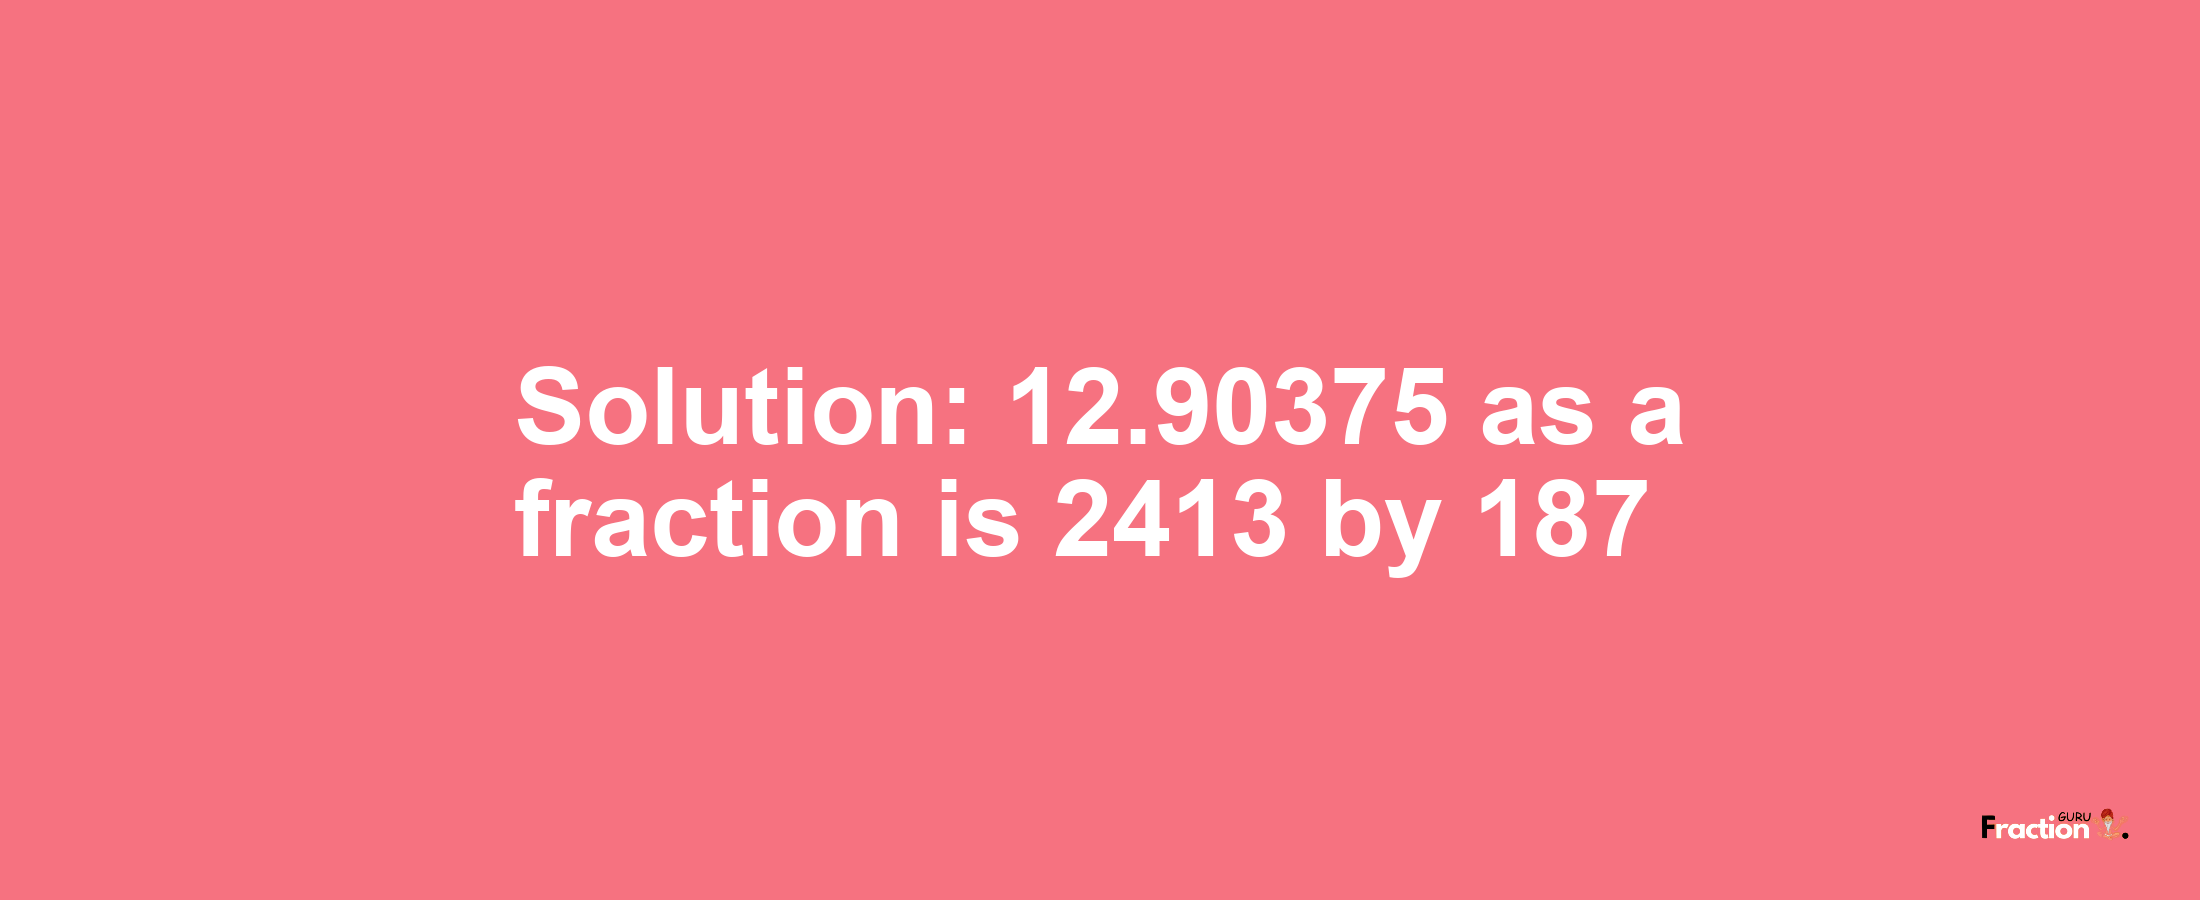 Solution:12.90375 as a fraction is 2413/187